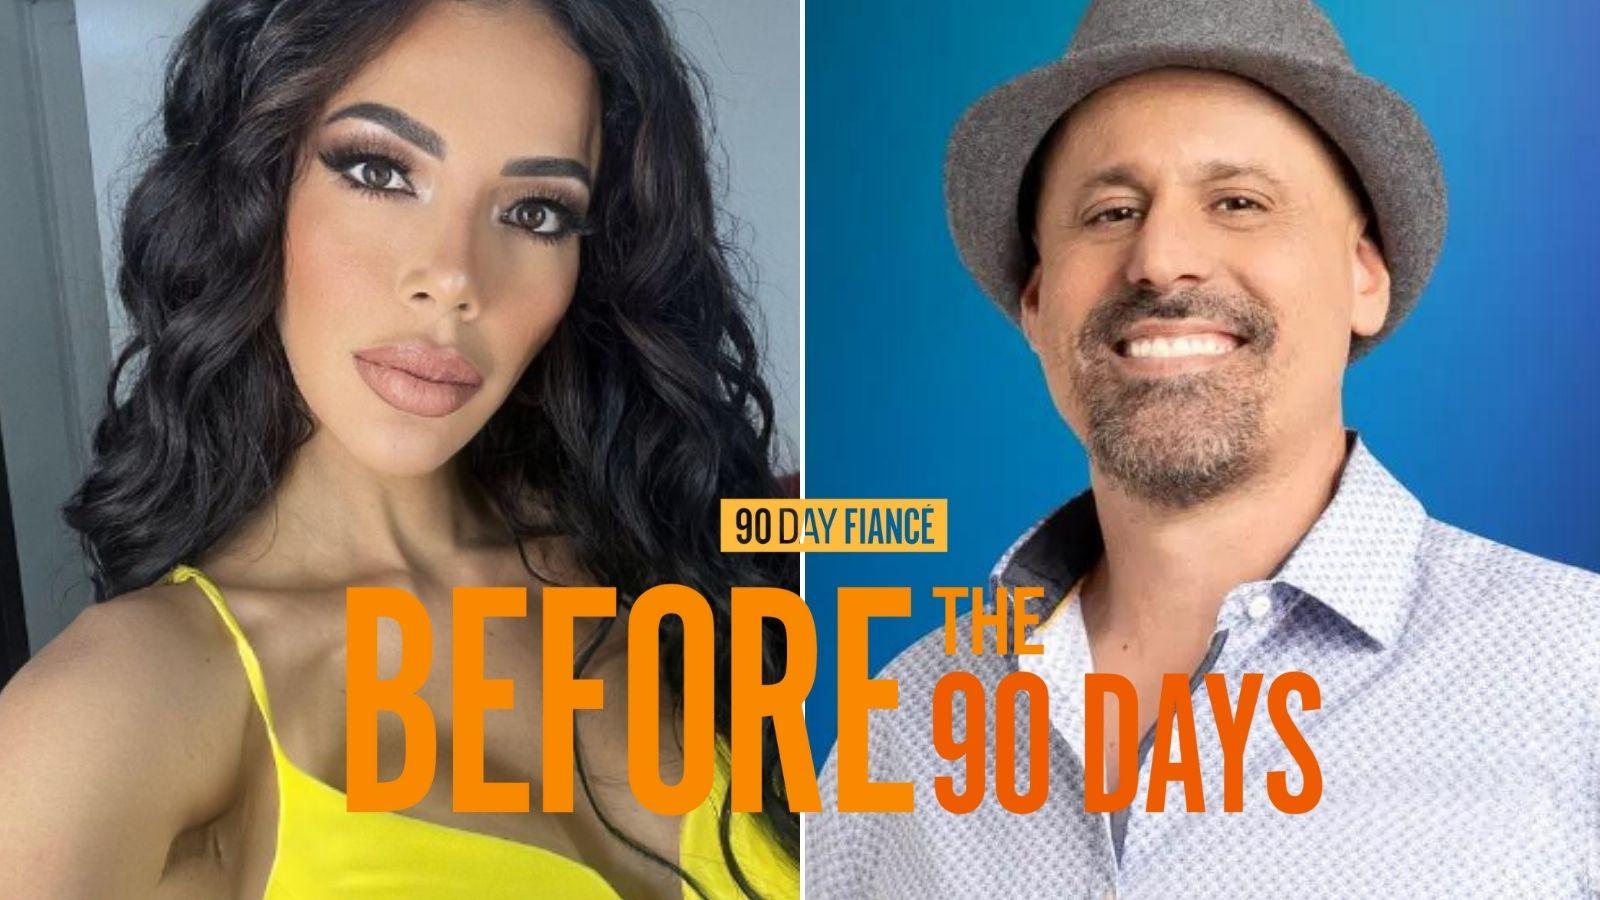 90 Day Fiancé: Before the 90 Days’ Jasmine and Gino call of engagement ...